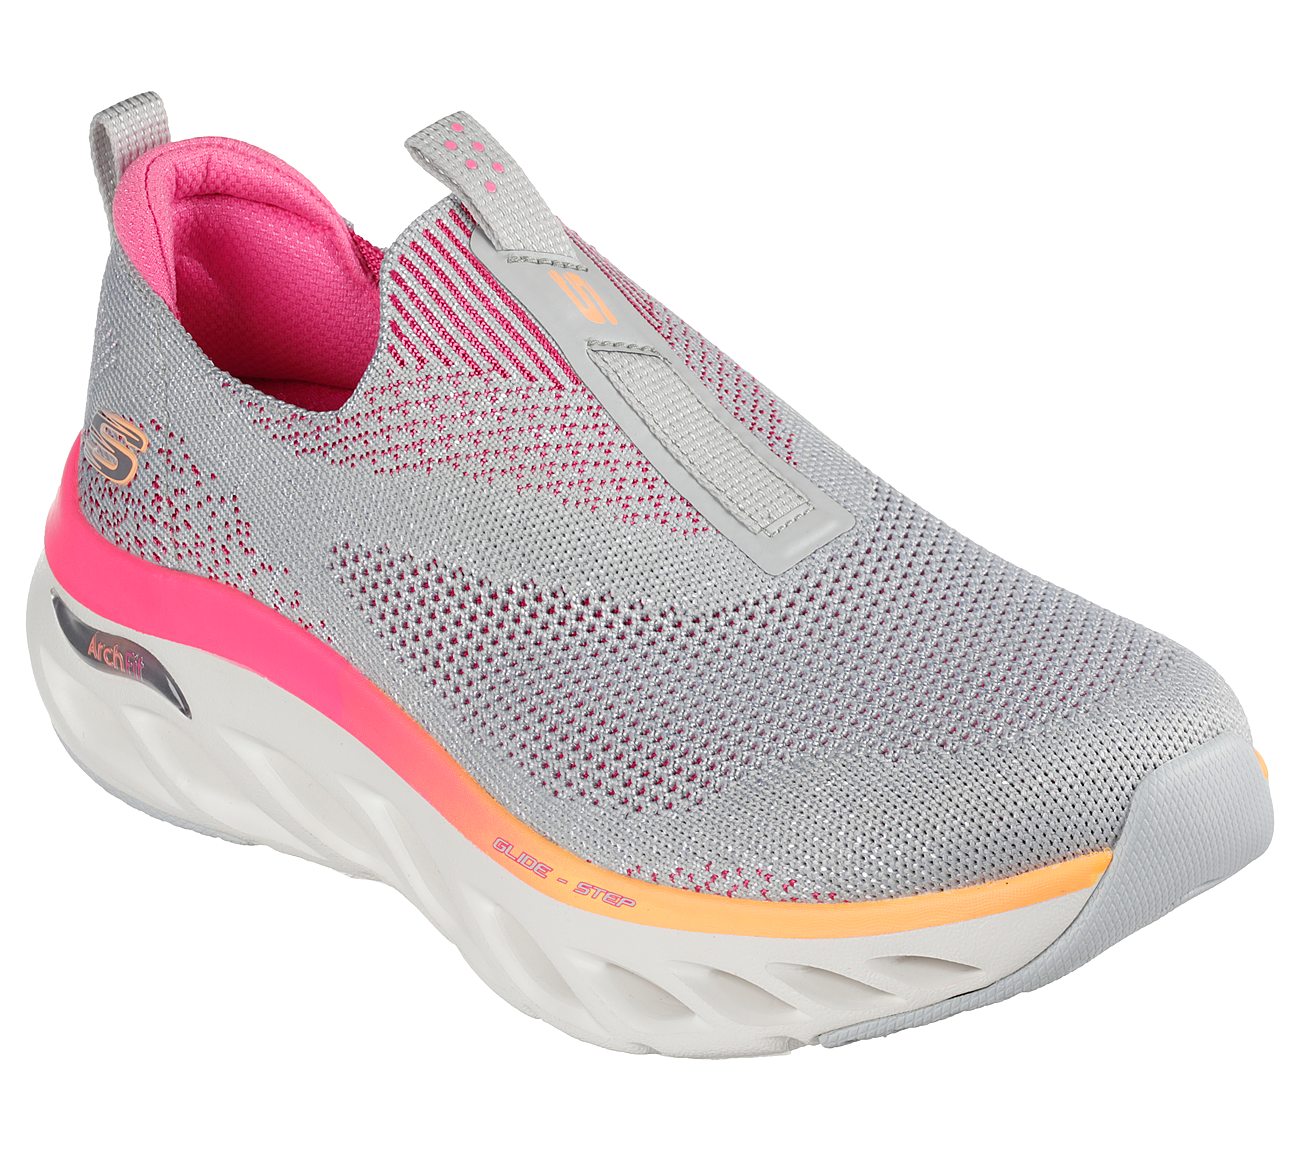 ARCH FIT GLIDE-STEP, GGREY/MULTI Footwear Lateral View